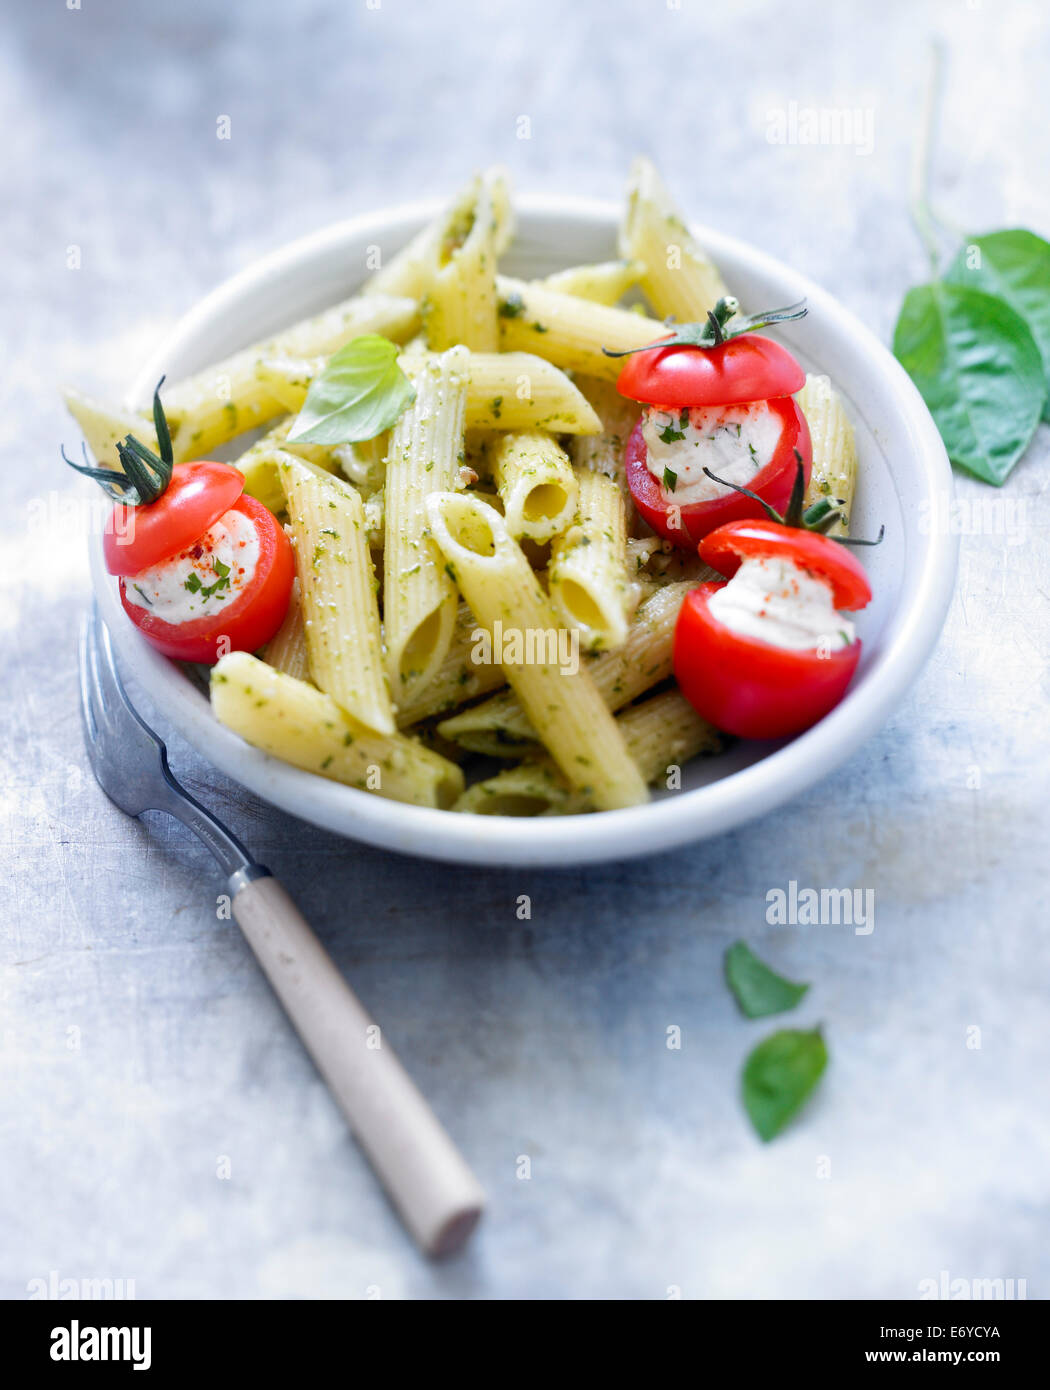 Penne with pesto and cherry tomatoes stuffed with ricotta Stock Photo